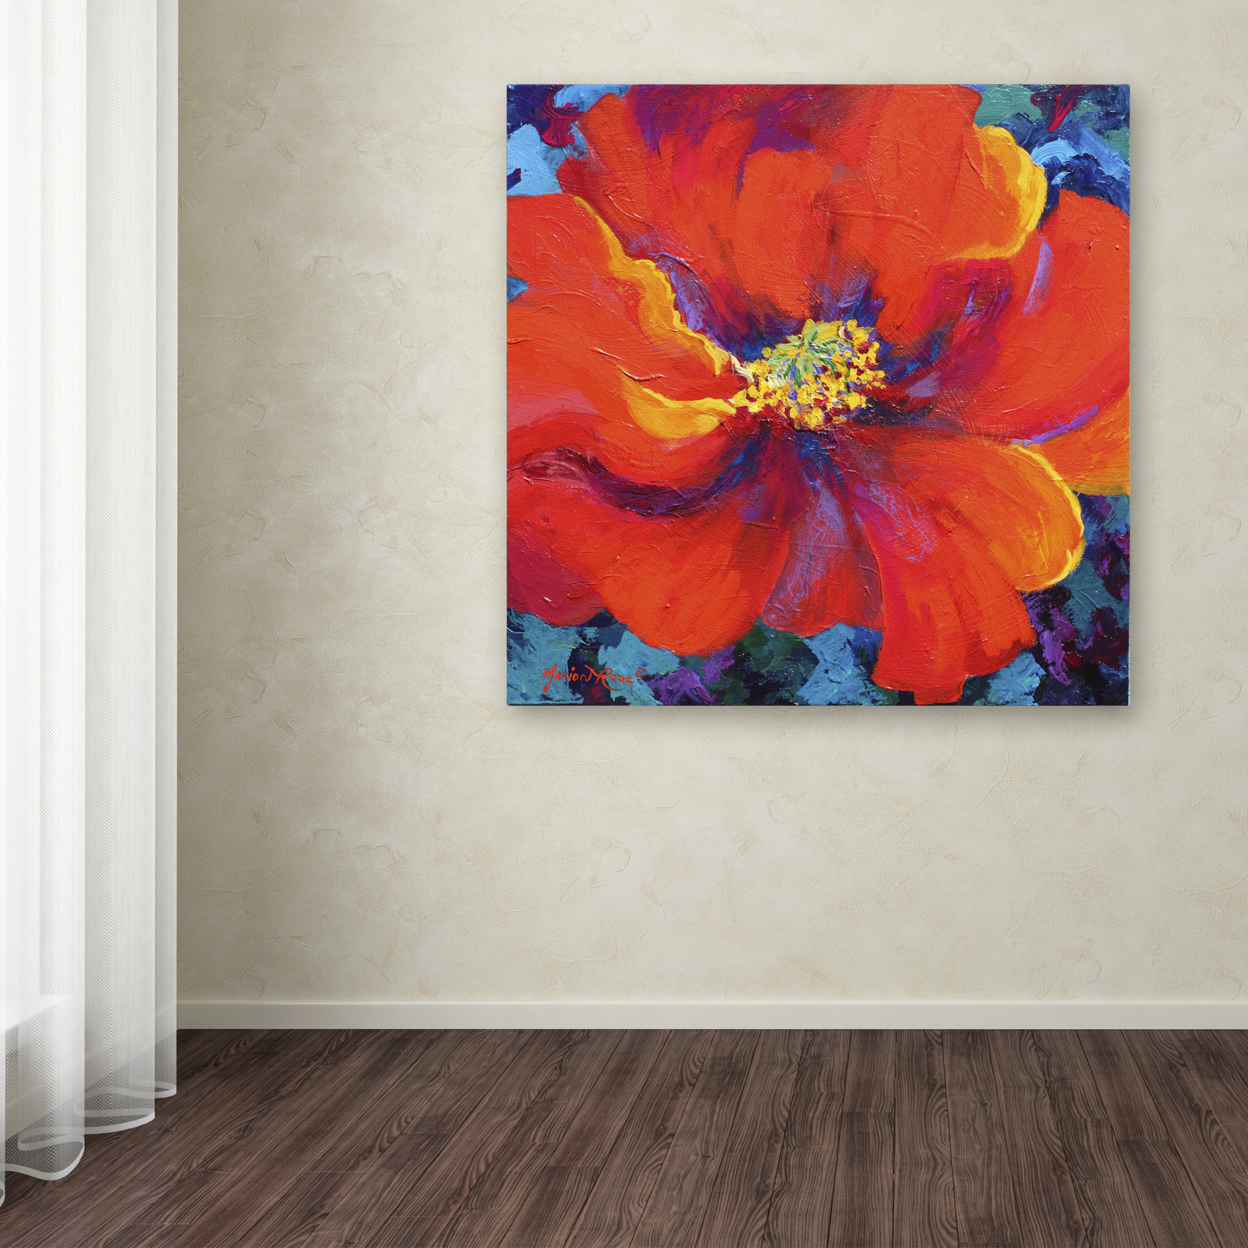 Marion Rose 'Passion Poppy' Ready To Hang Canvas Art 35 X 35 Inches Made In USA